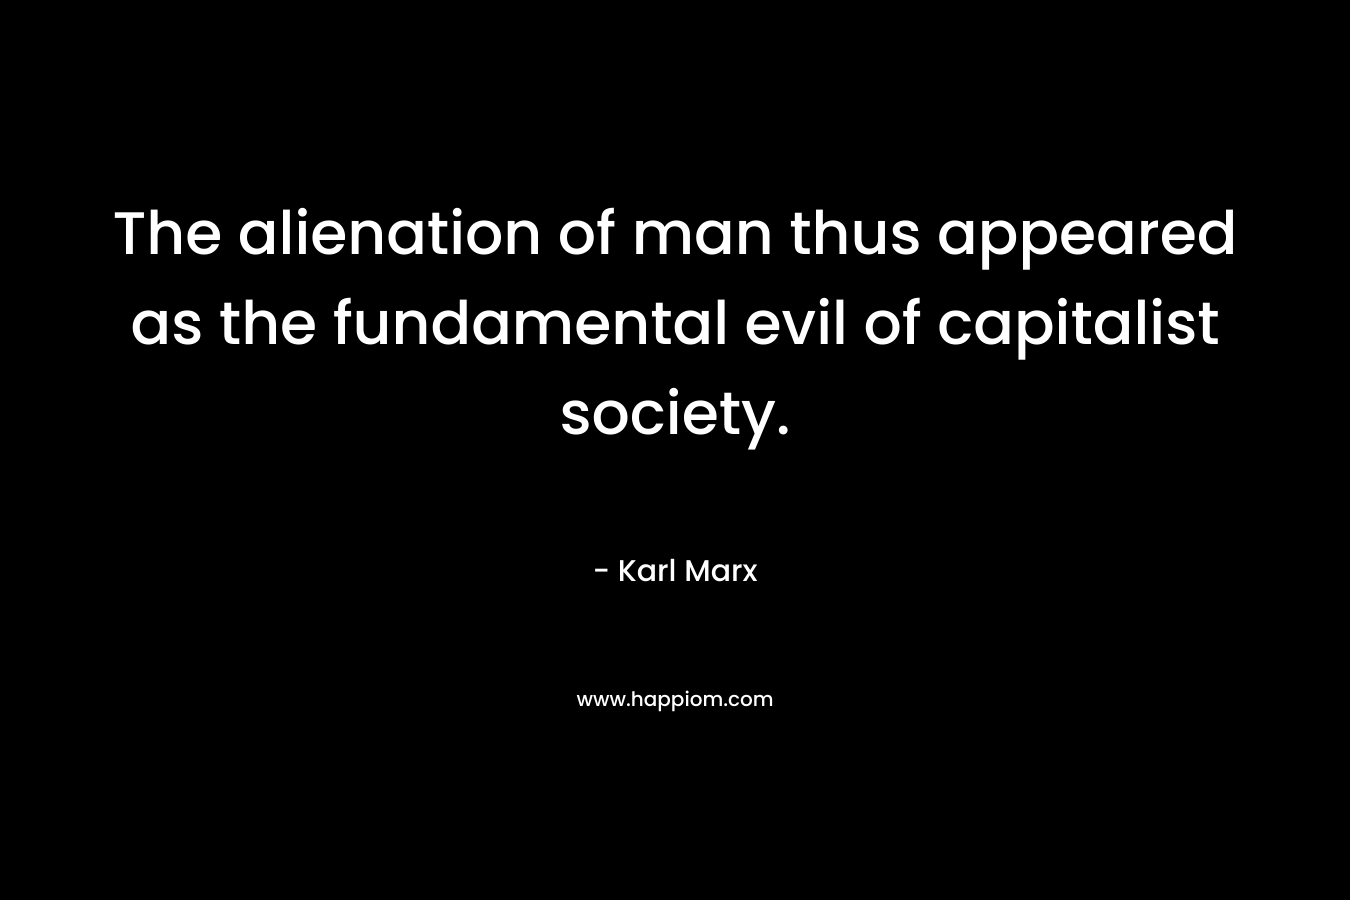 The alienation of man thus appeared as the fundamental evil of capitalist society.